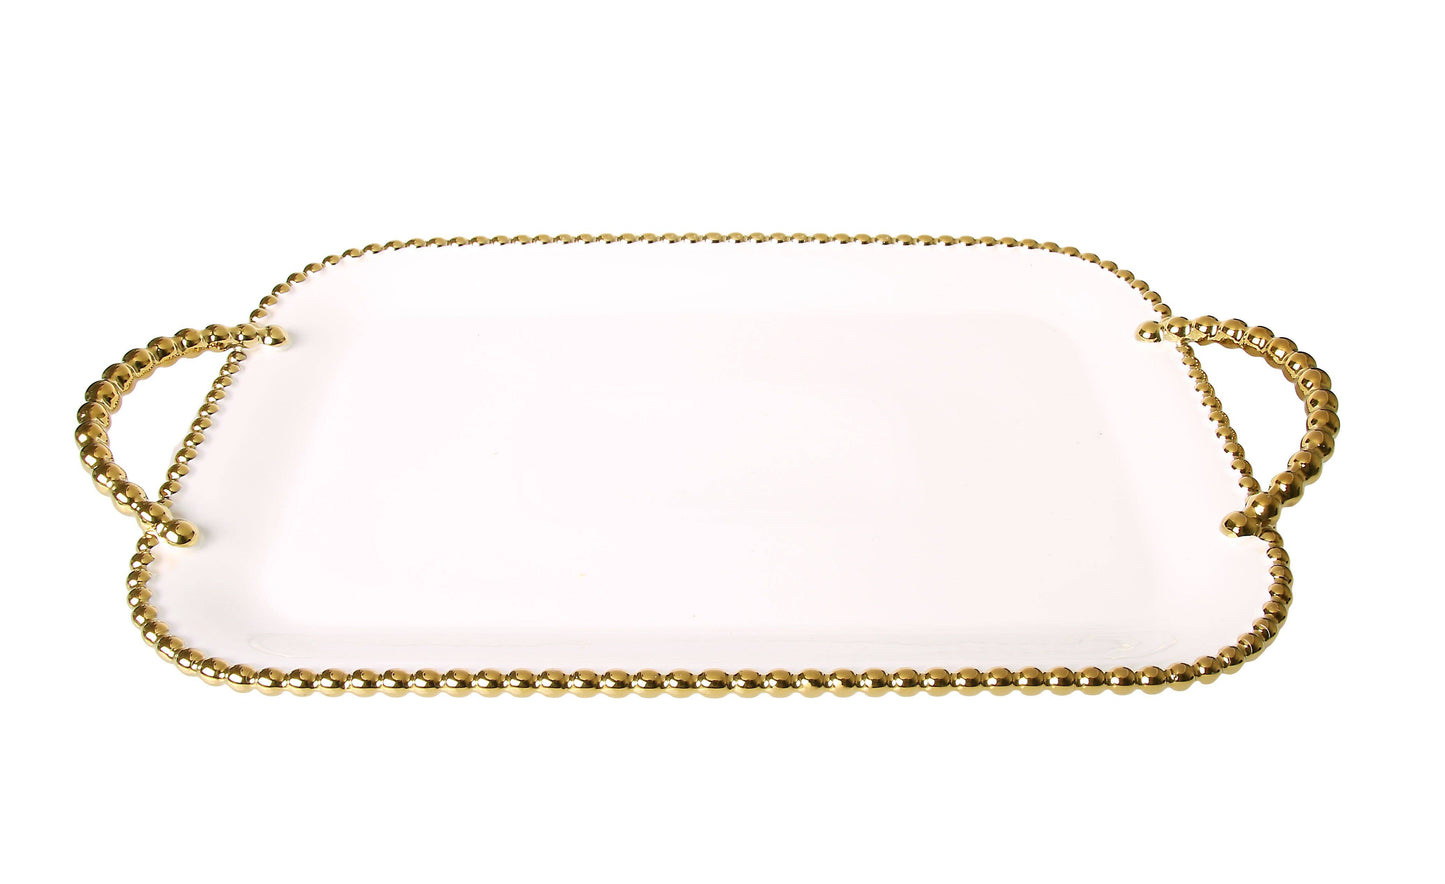 Porcelain Tray with Gold Beaded Borders and Handles